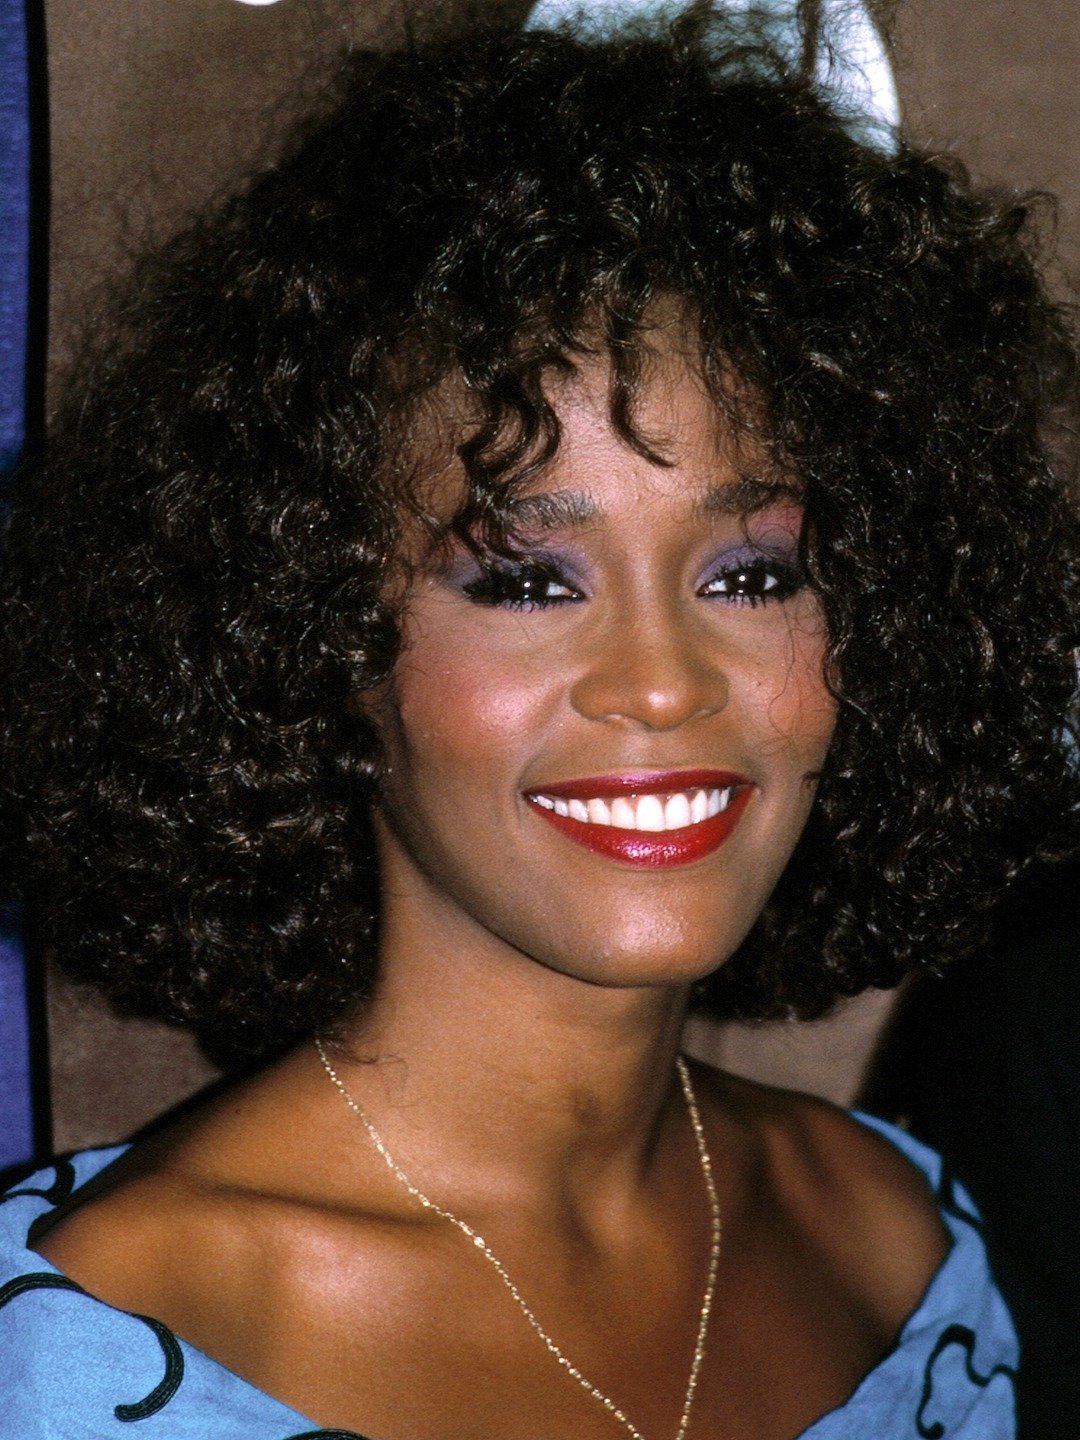 How tall is Whitney Houston?